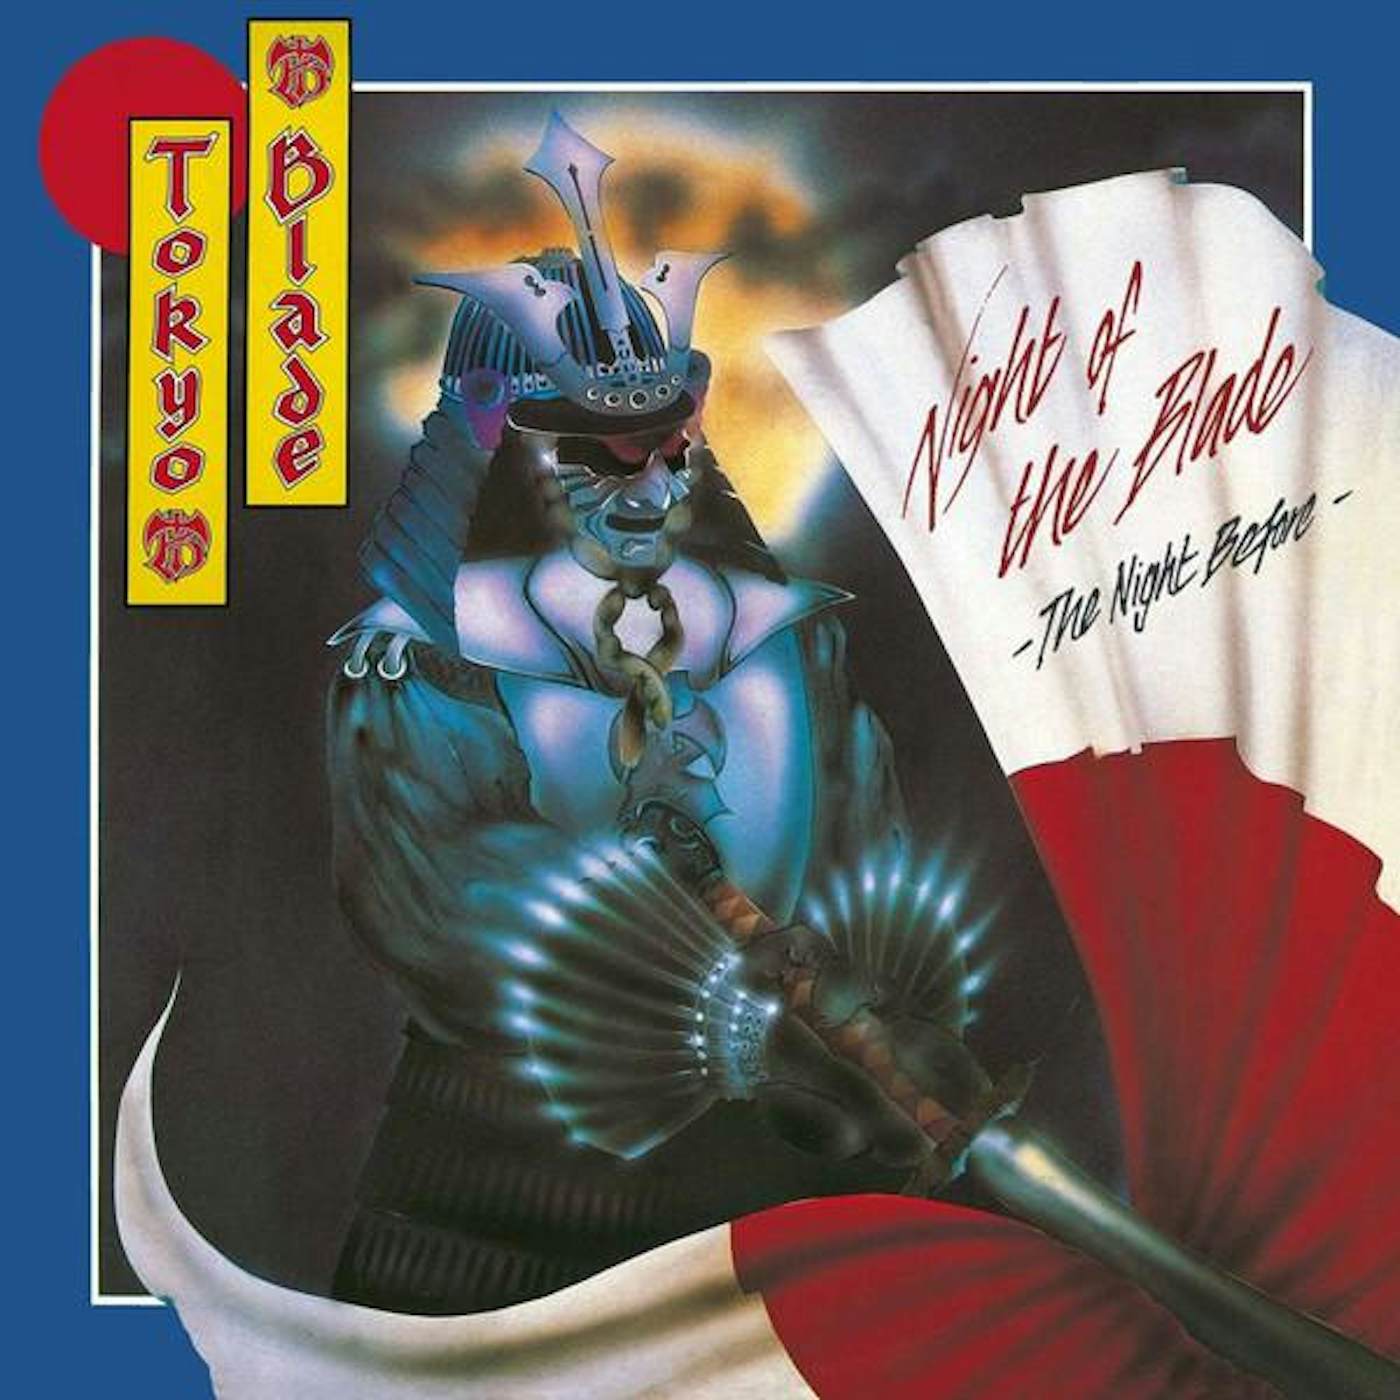 Tokyo Blade Night Of The Blade: The Night Before (Mixed Vinyl) Vinyl Record